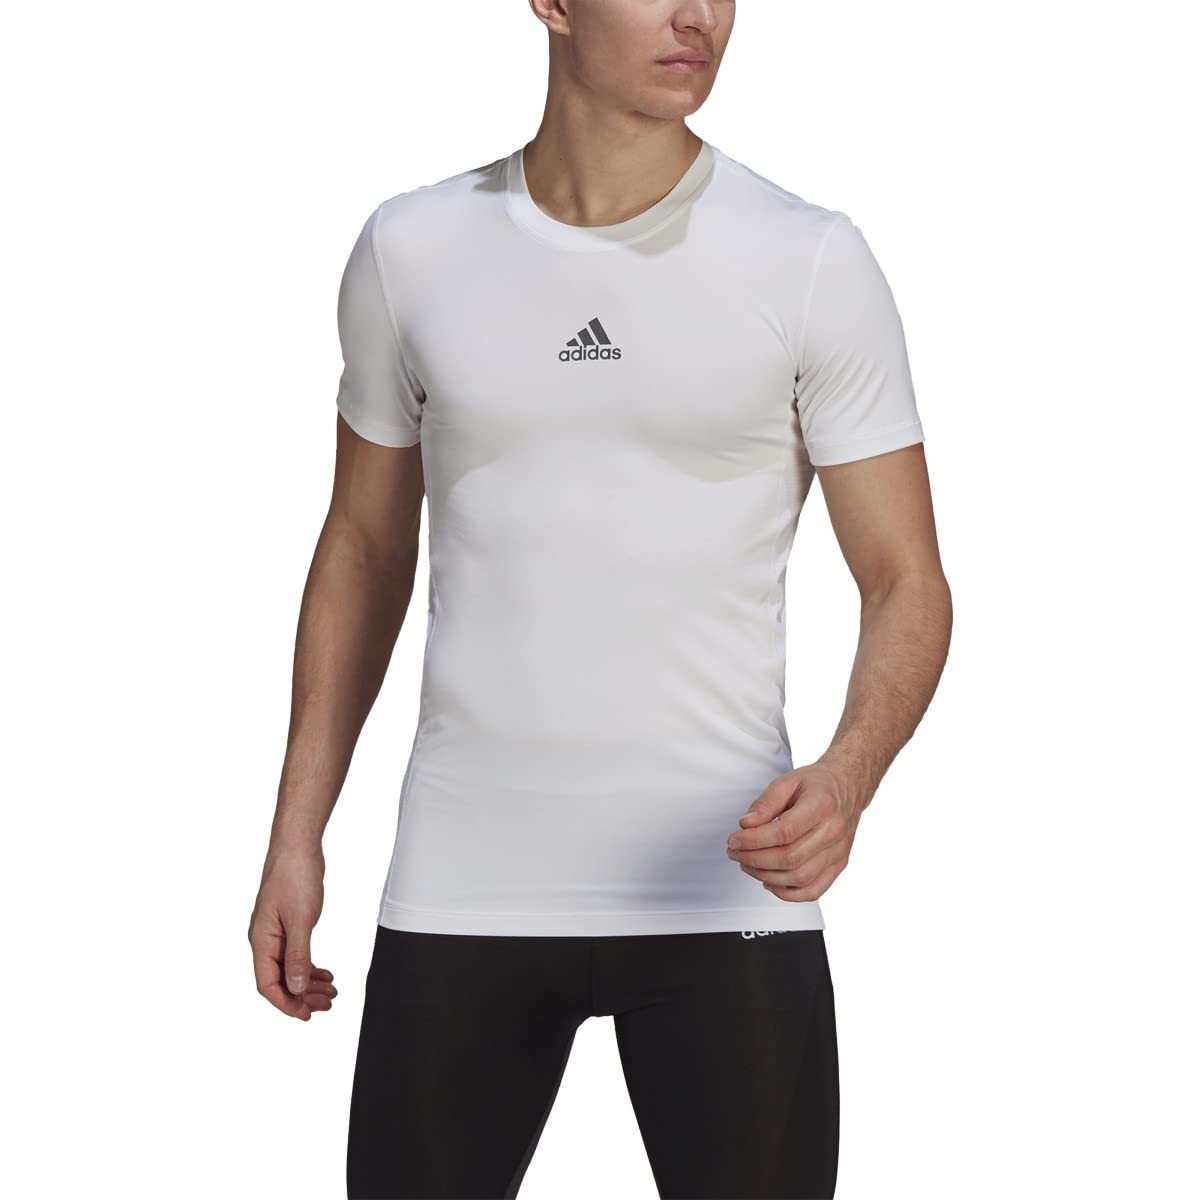 adidas Techfit Compression Short Sleeve Top - Mens Soccer S White - $41.05